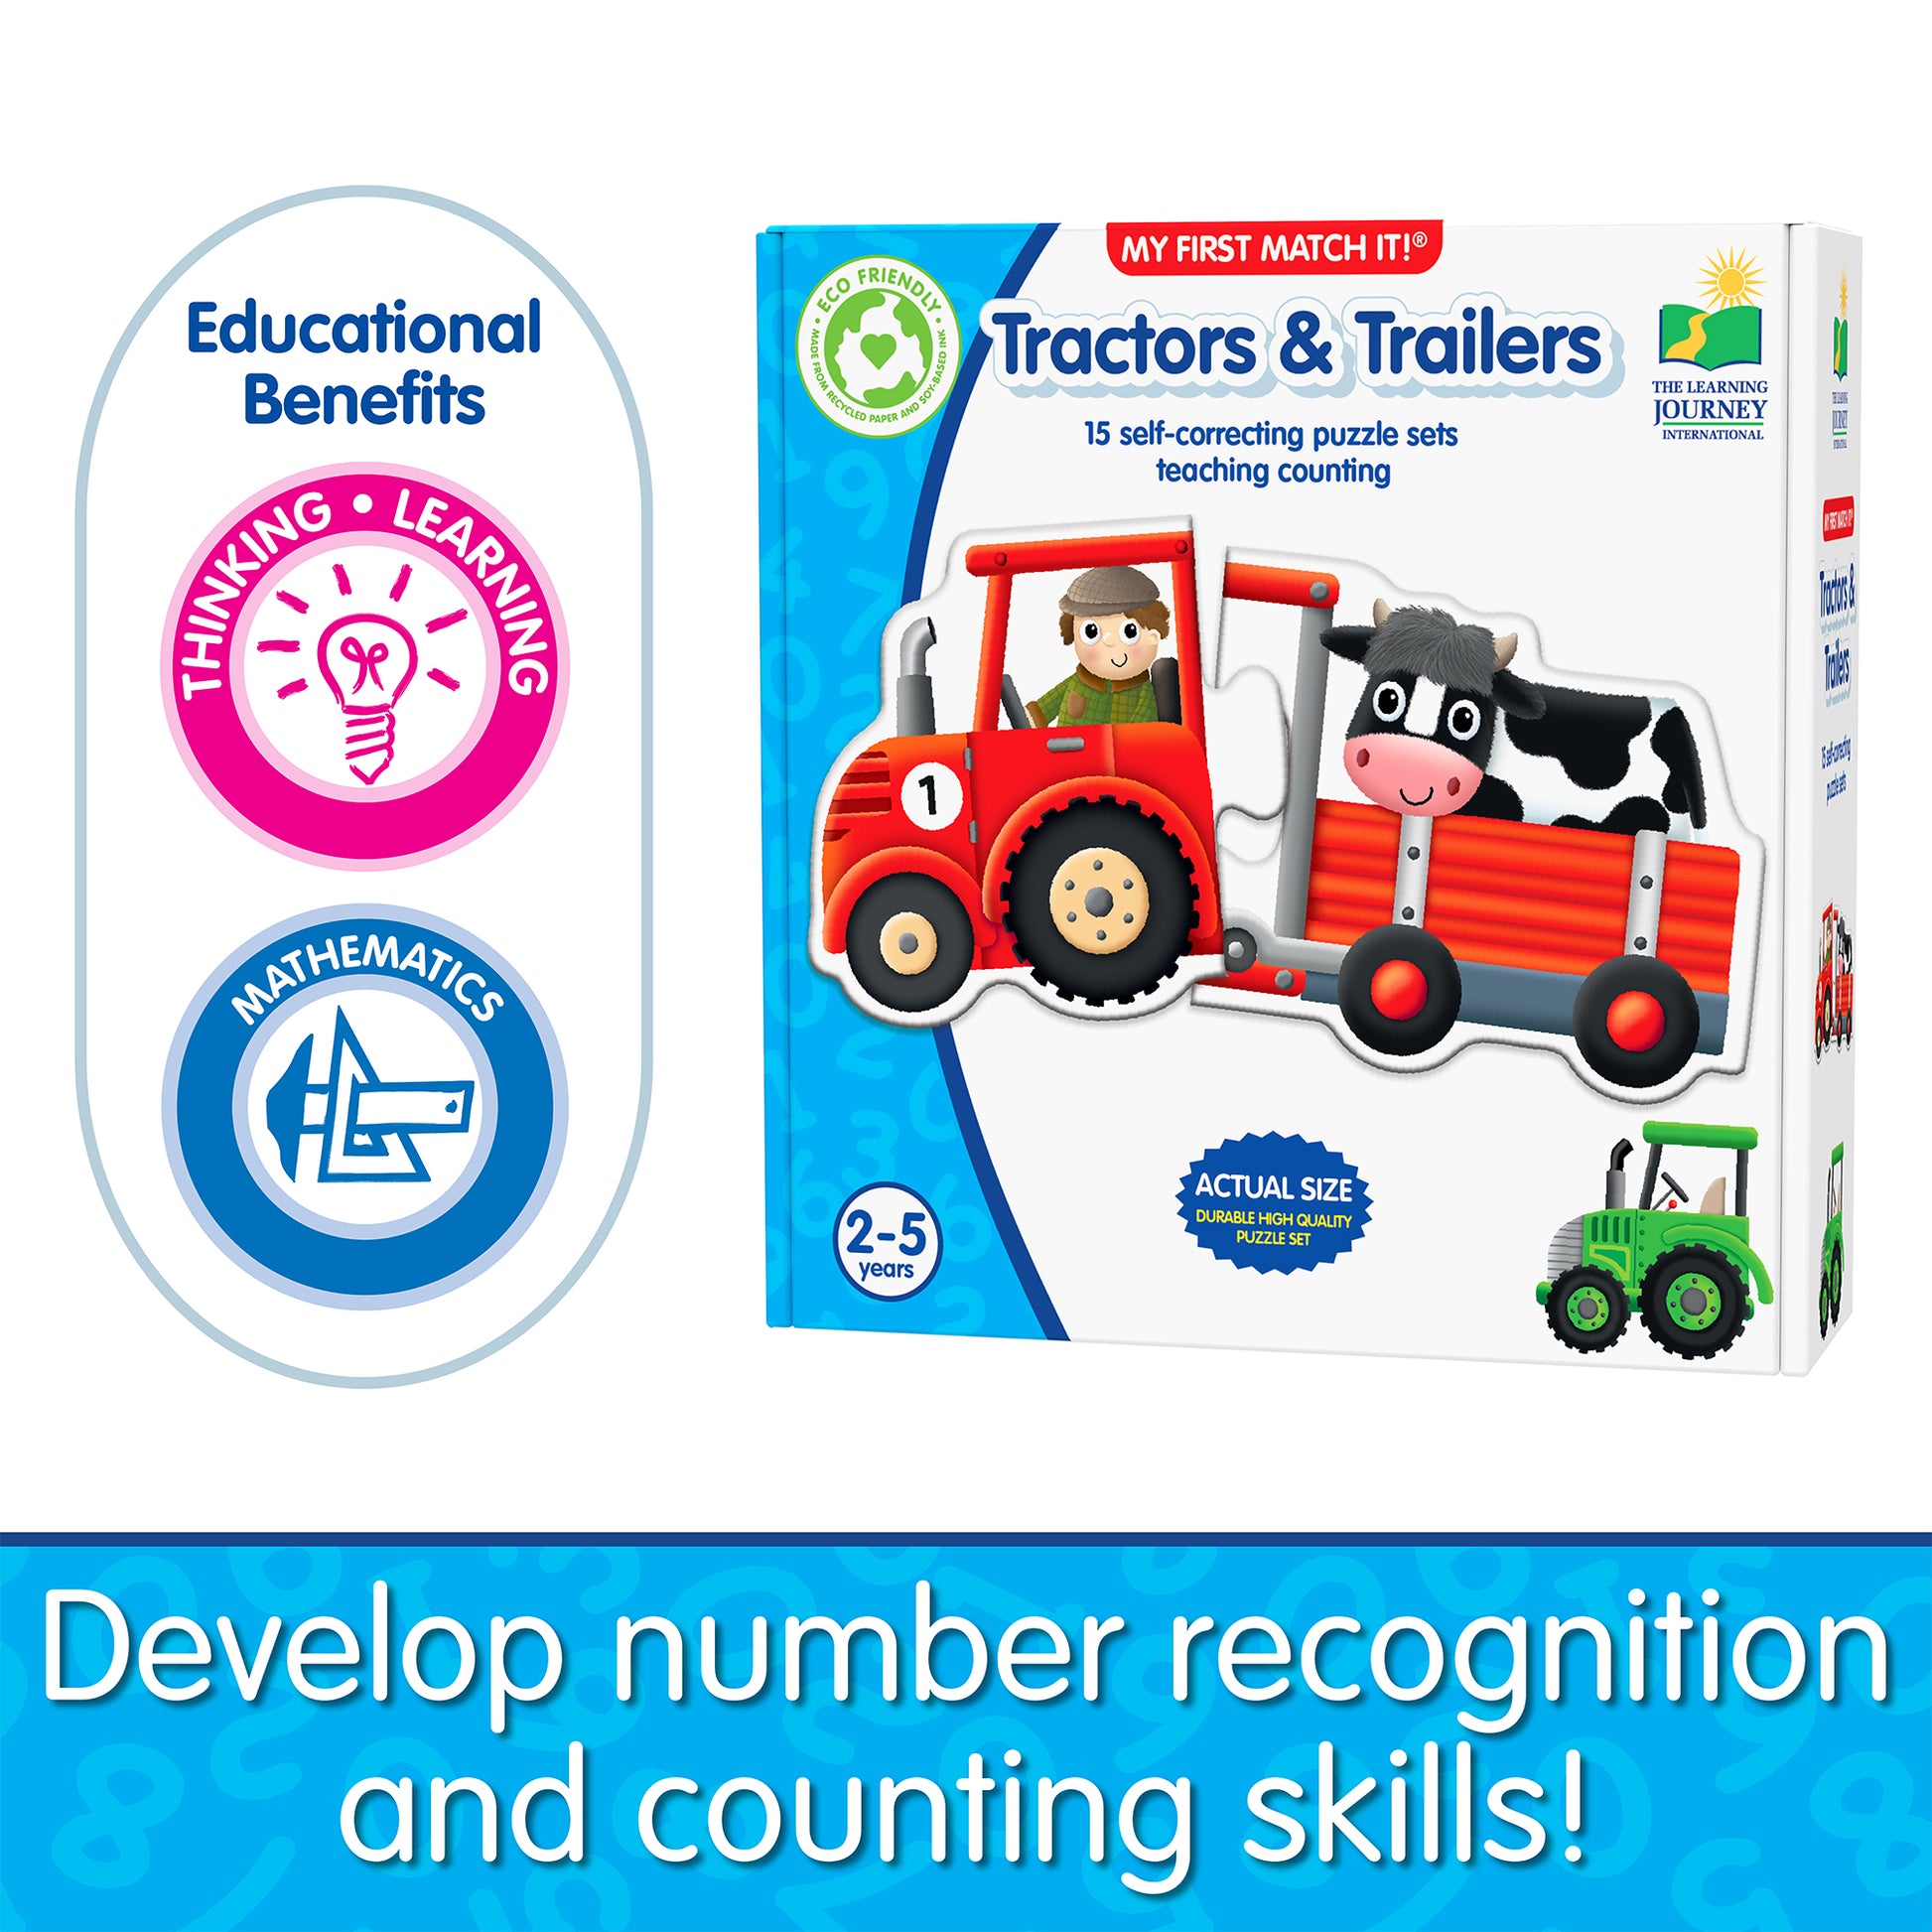 Infographic about Tractors and Trailers' educational benefits